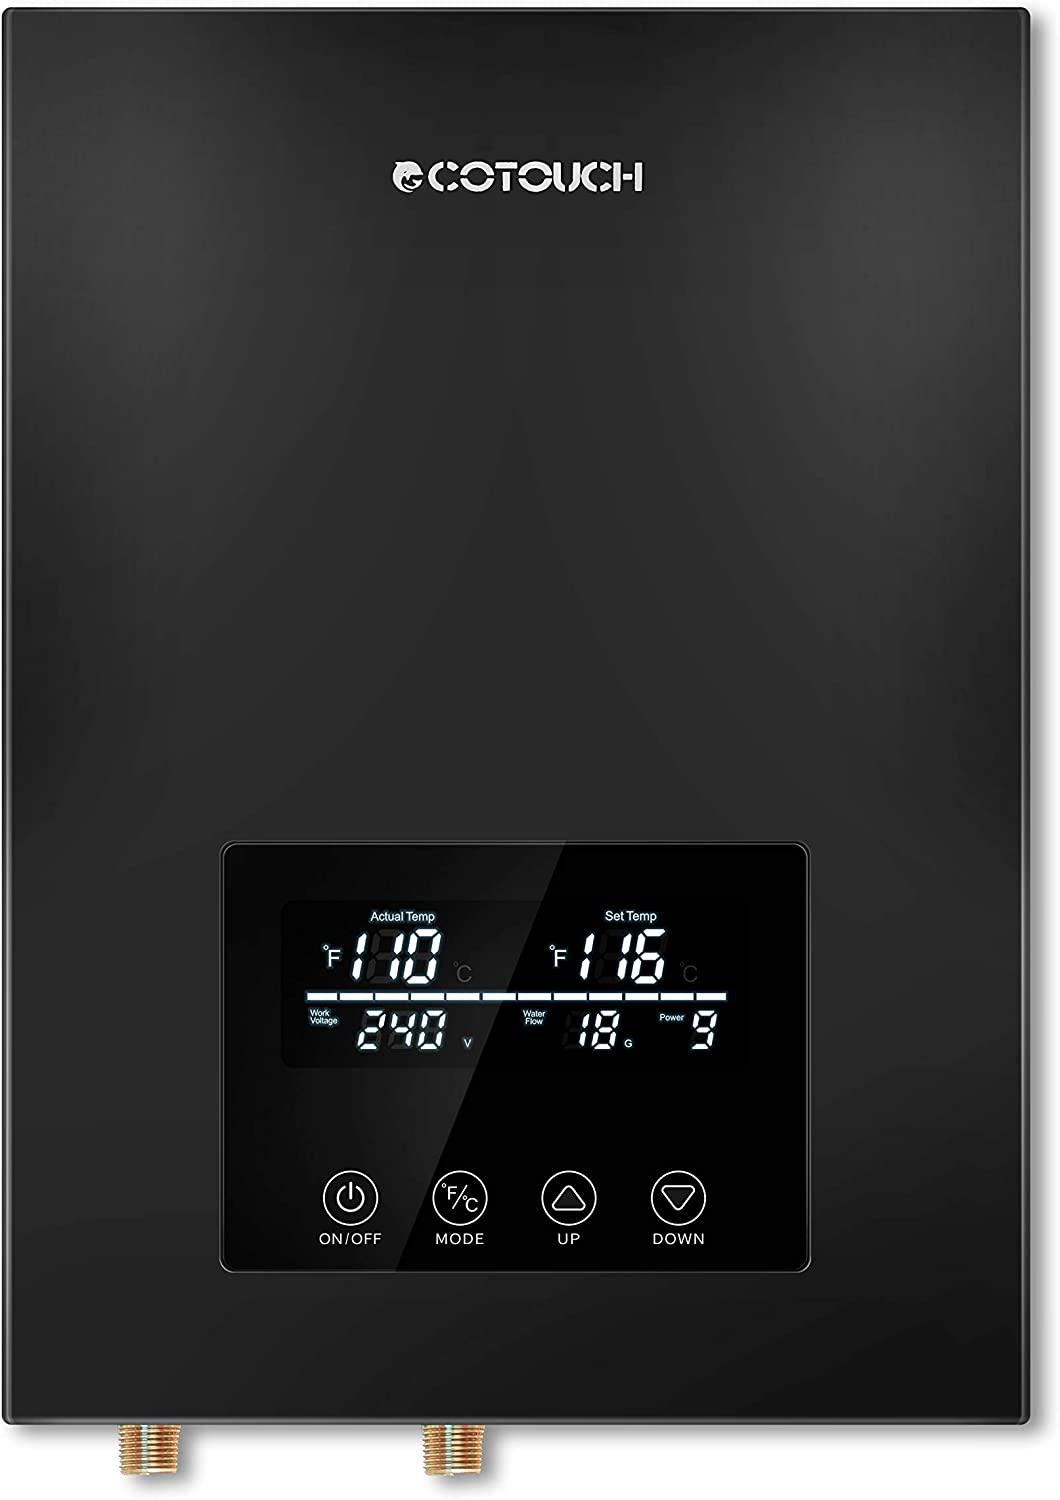 smart water heater- Ecotouch ECO 90